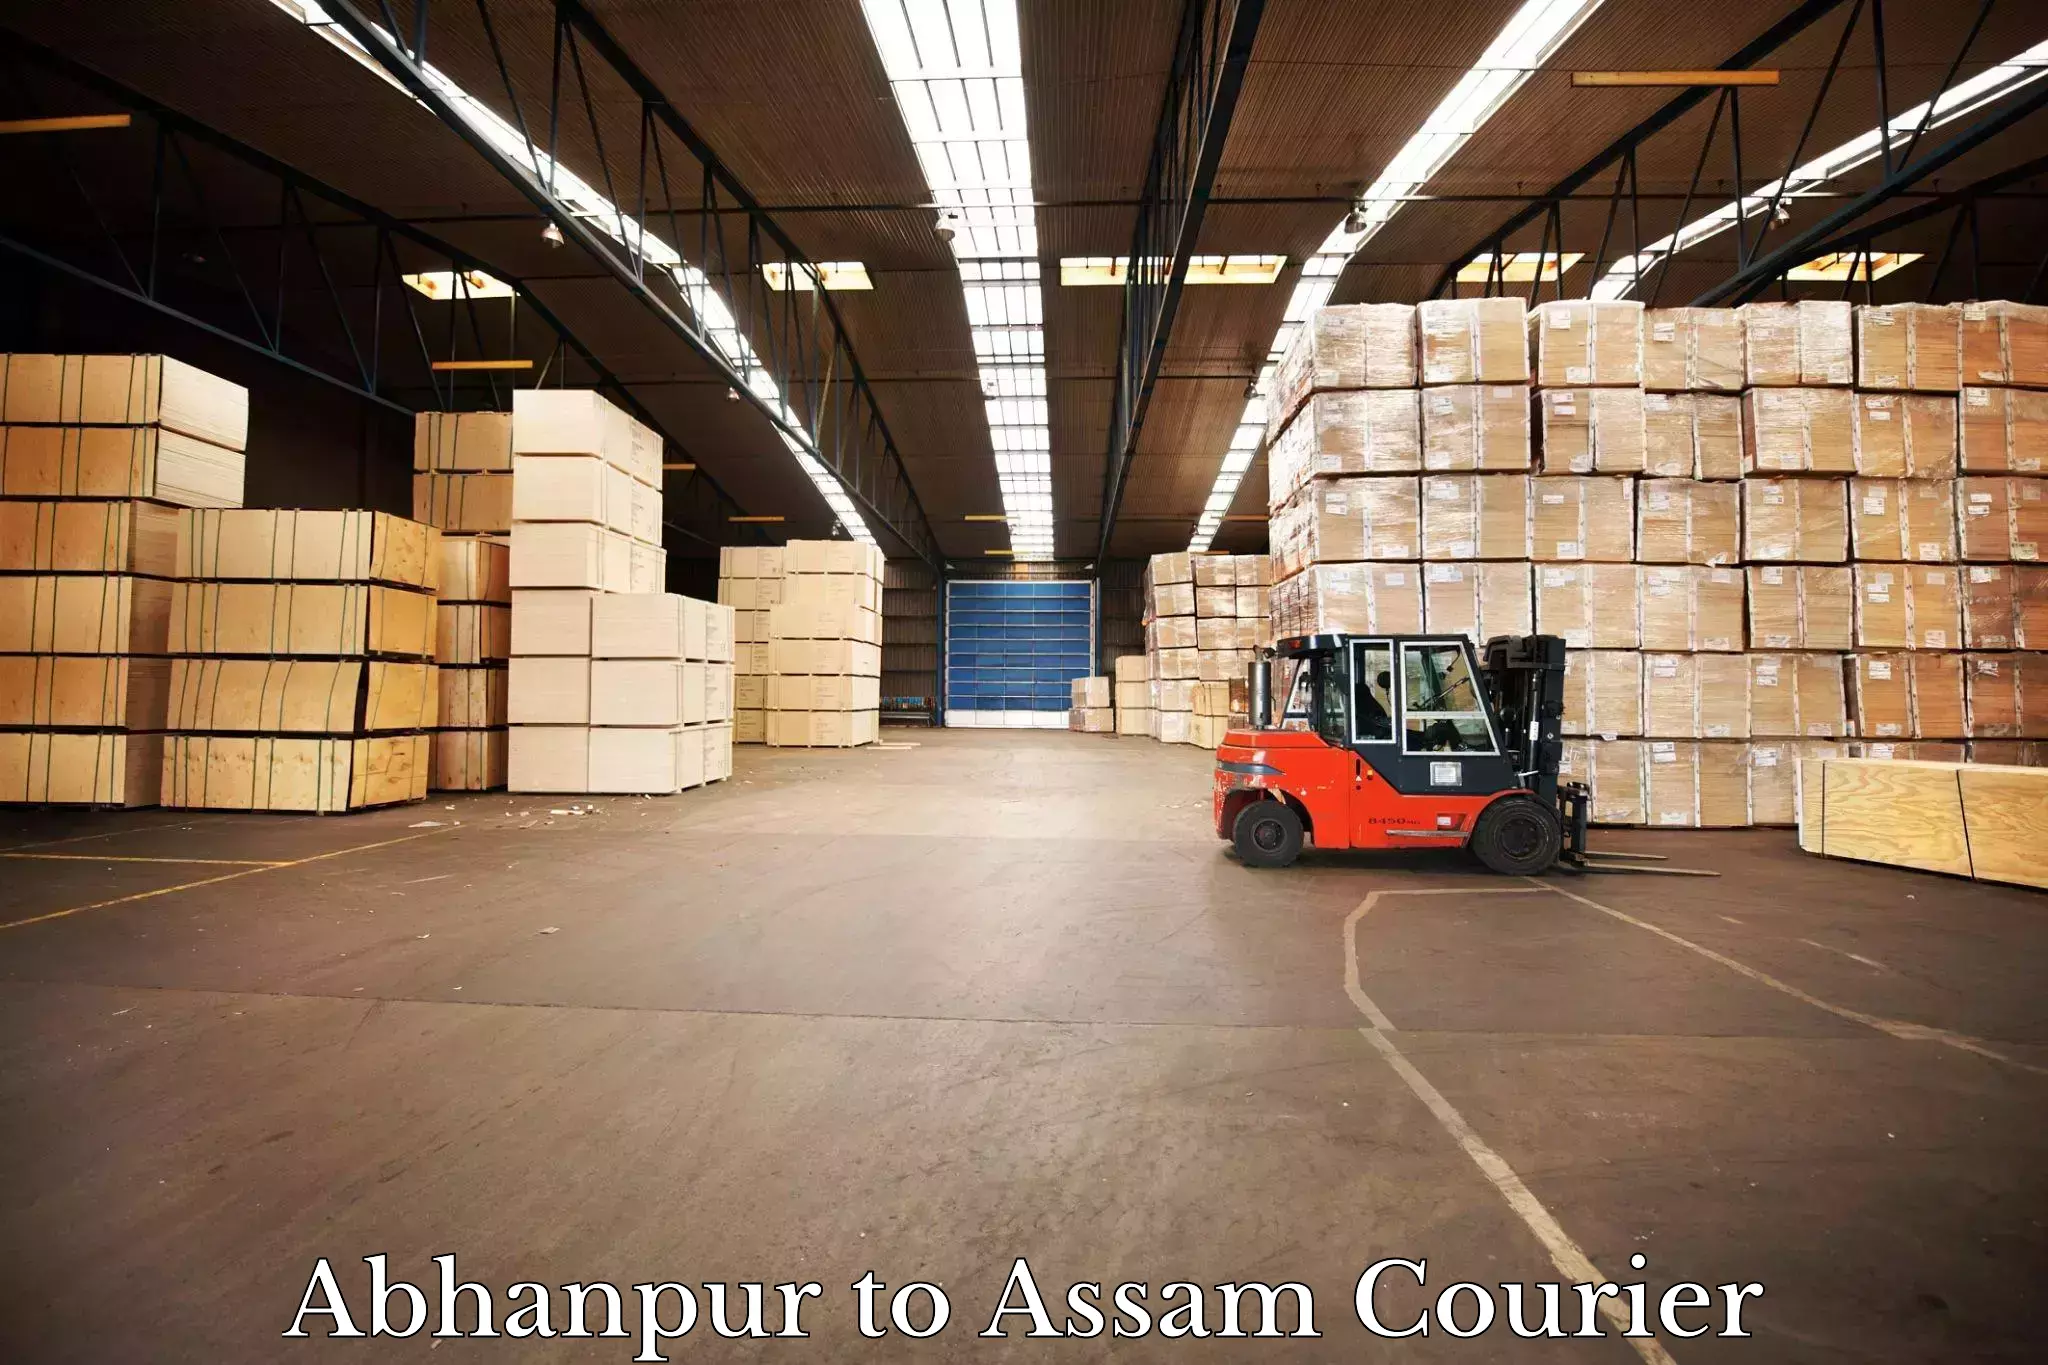 Rural area delivery Abhanpur to Lala Assam